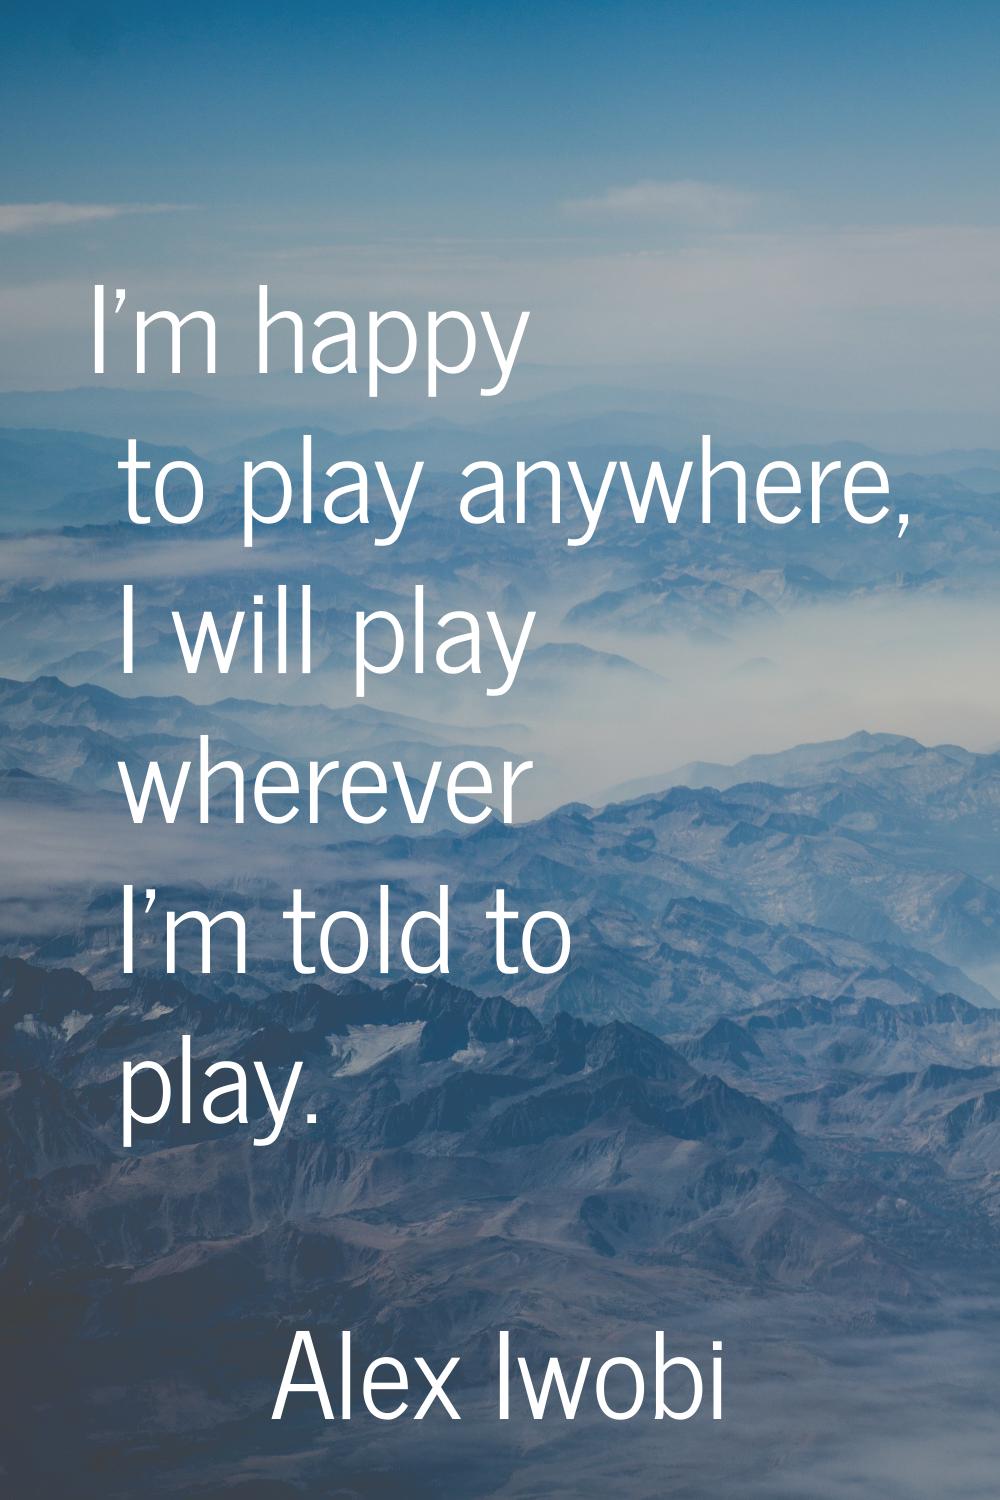 I'm happy to play anywhere, I will play wherever I'm told to play.